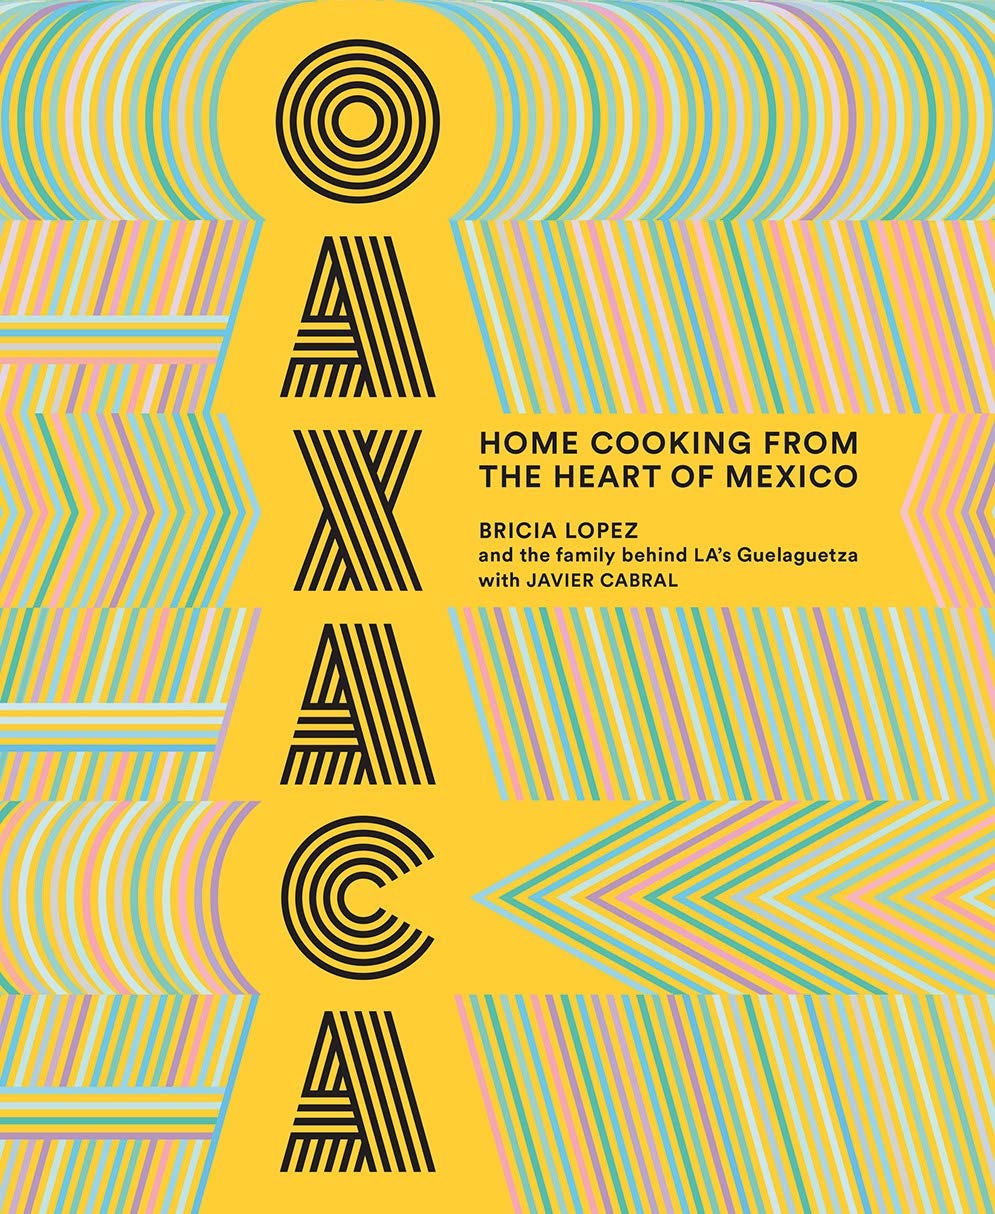 Oaxaca: Home Cooking from the Heart of Mexico (Bricia Lopez, Javier Cabral)